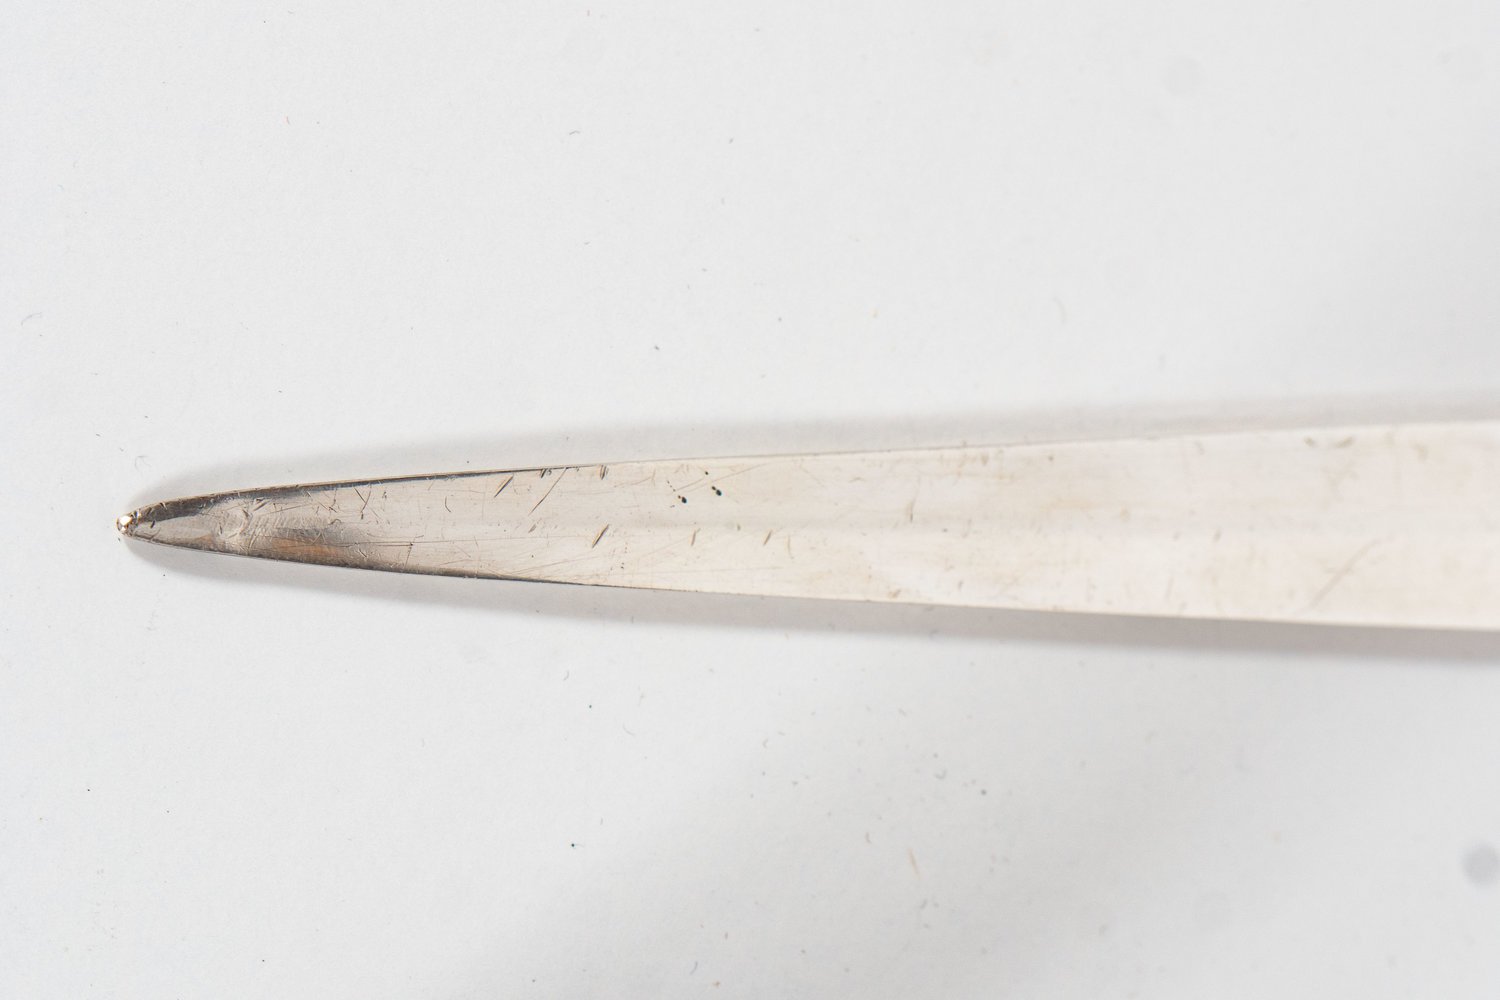 Silver-Plated Letter Opener